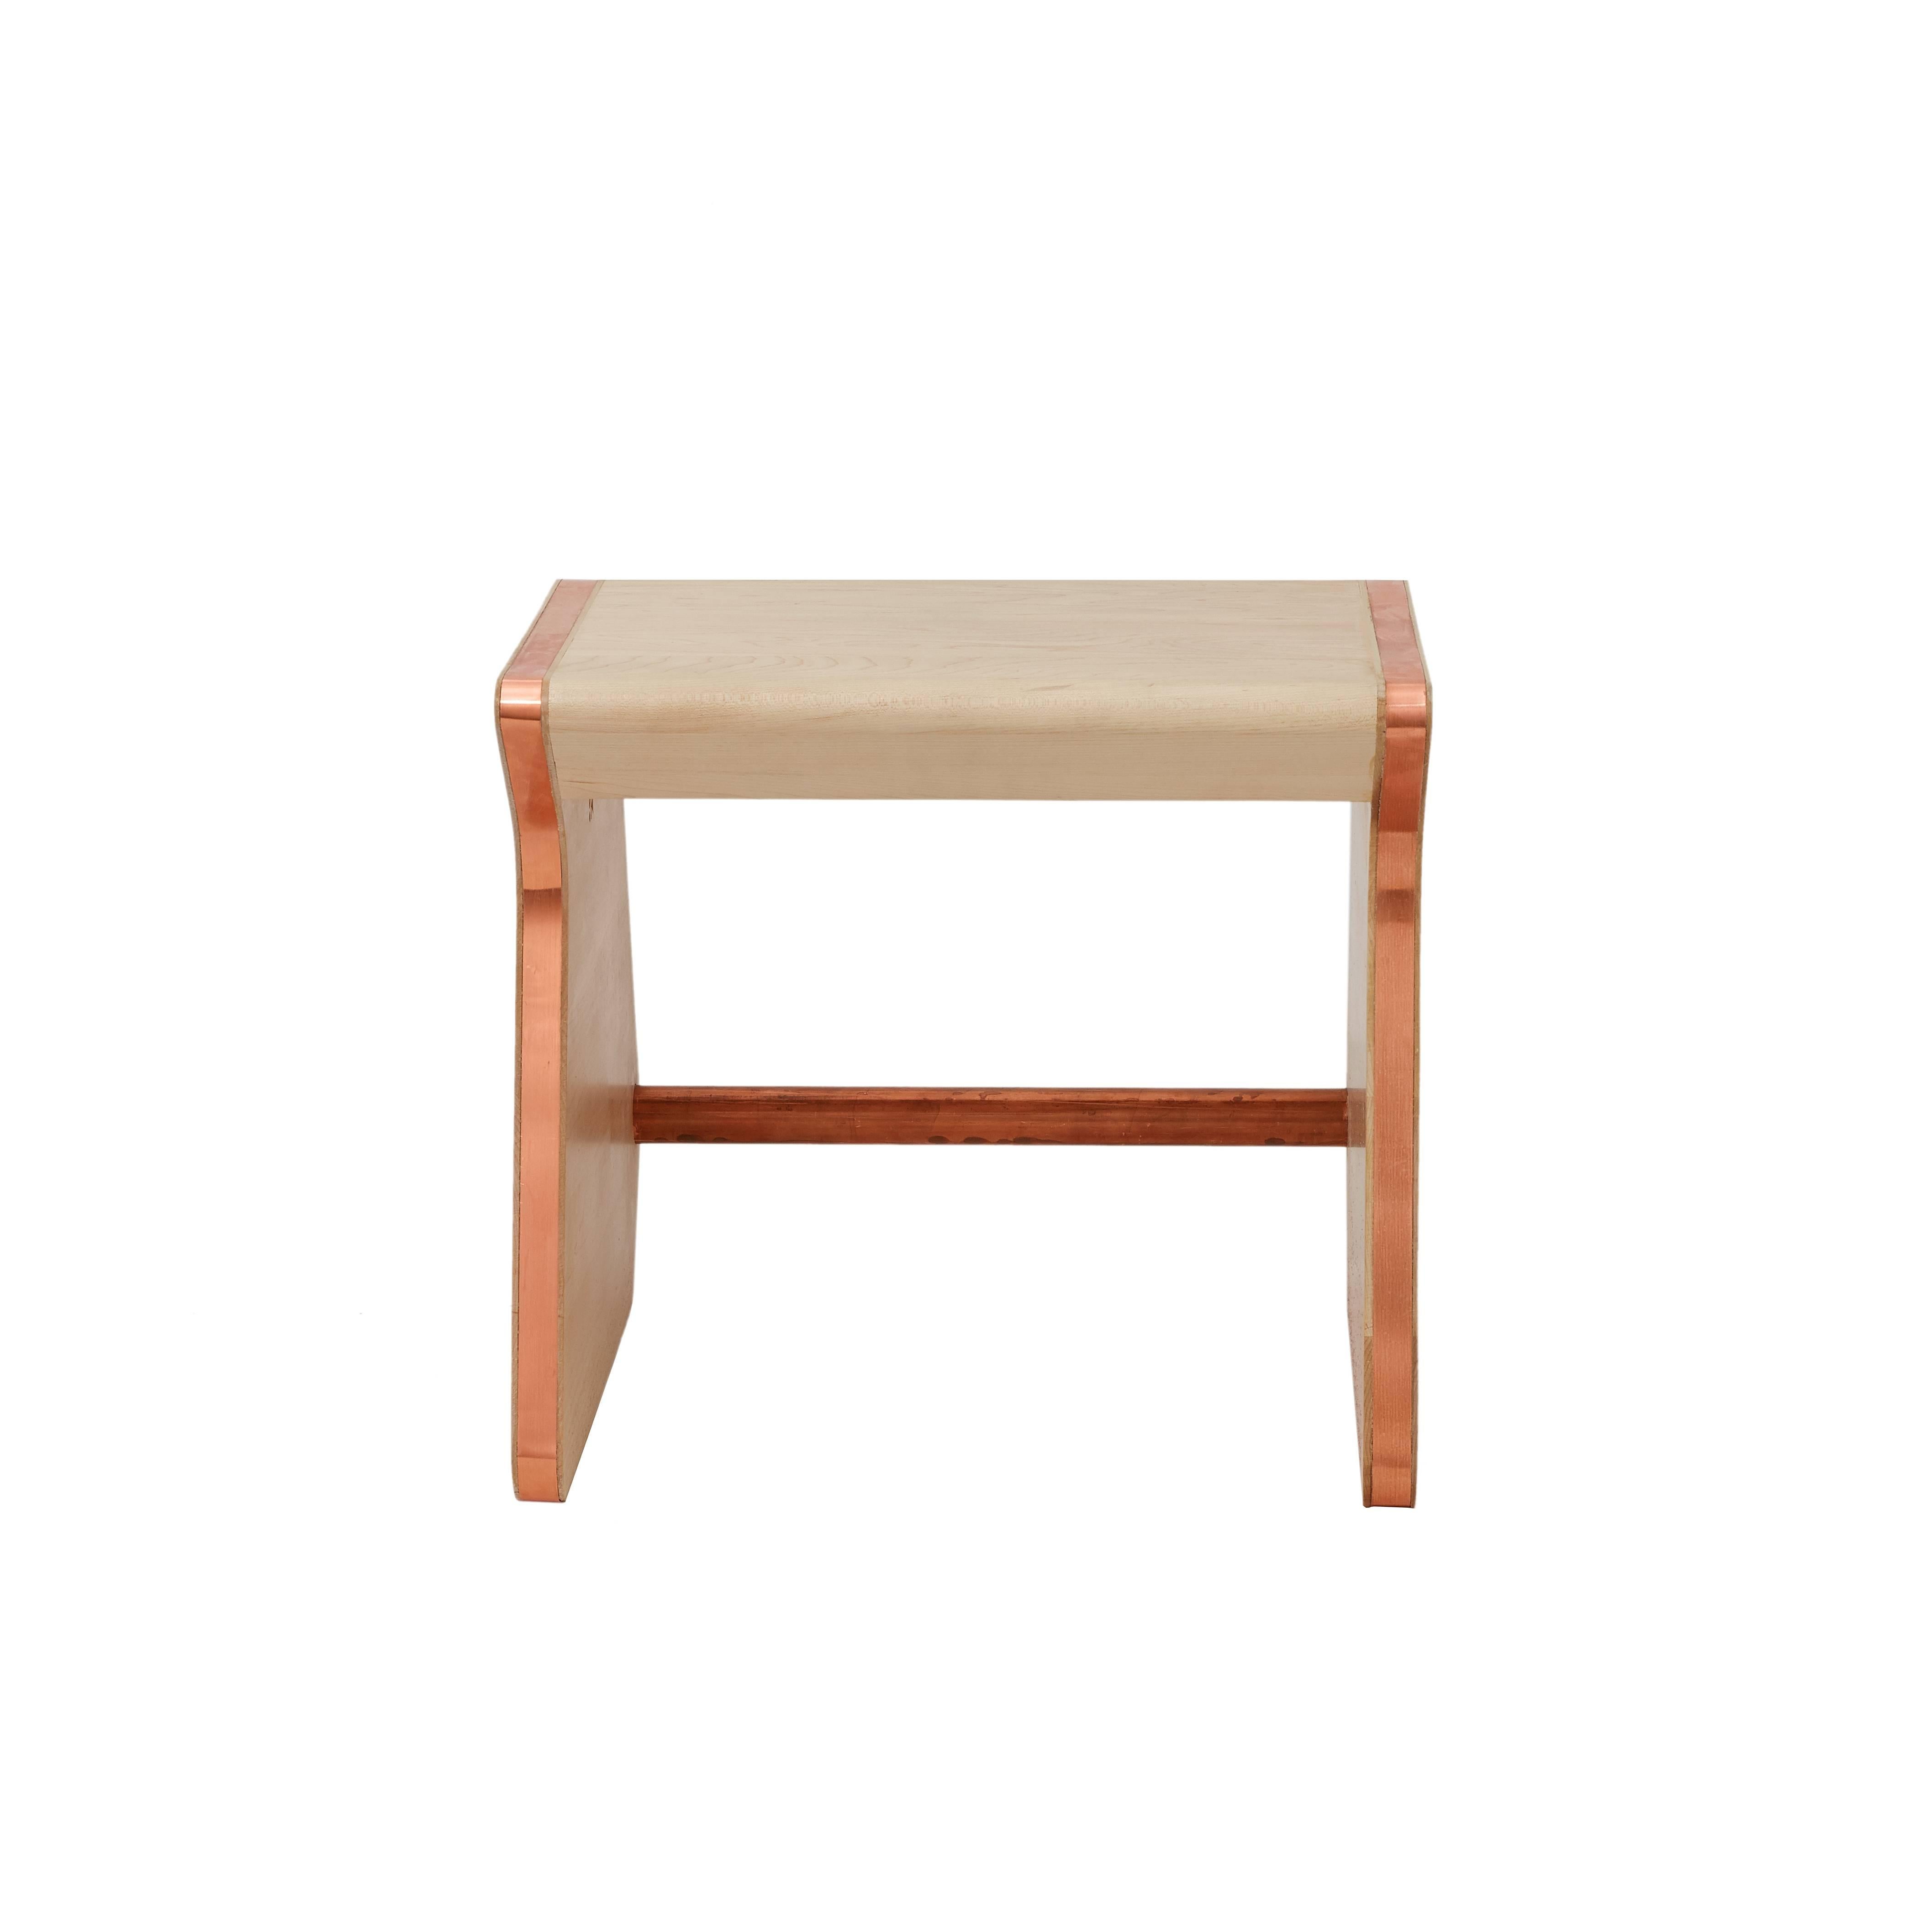 'Perch' Child Chair from the Heritage Collection by Studiokinder in Maple/Copper In Excellent Condition For Sale In New York, NY